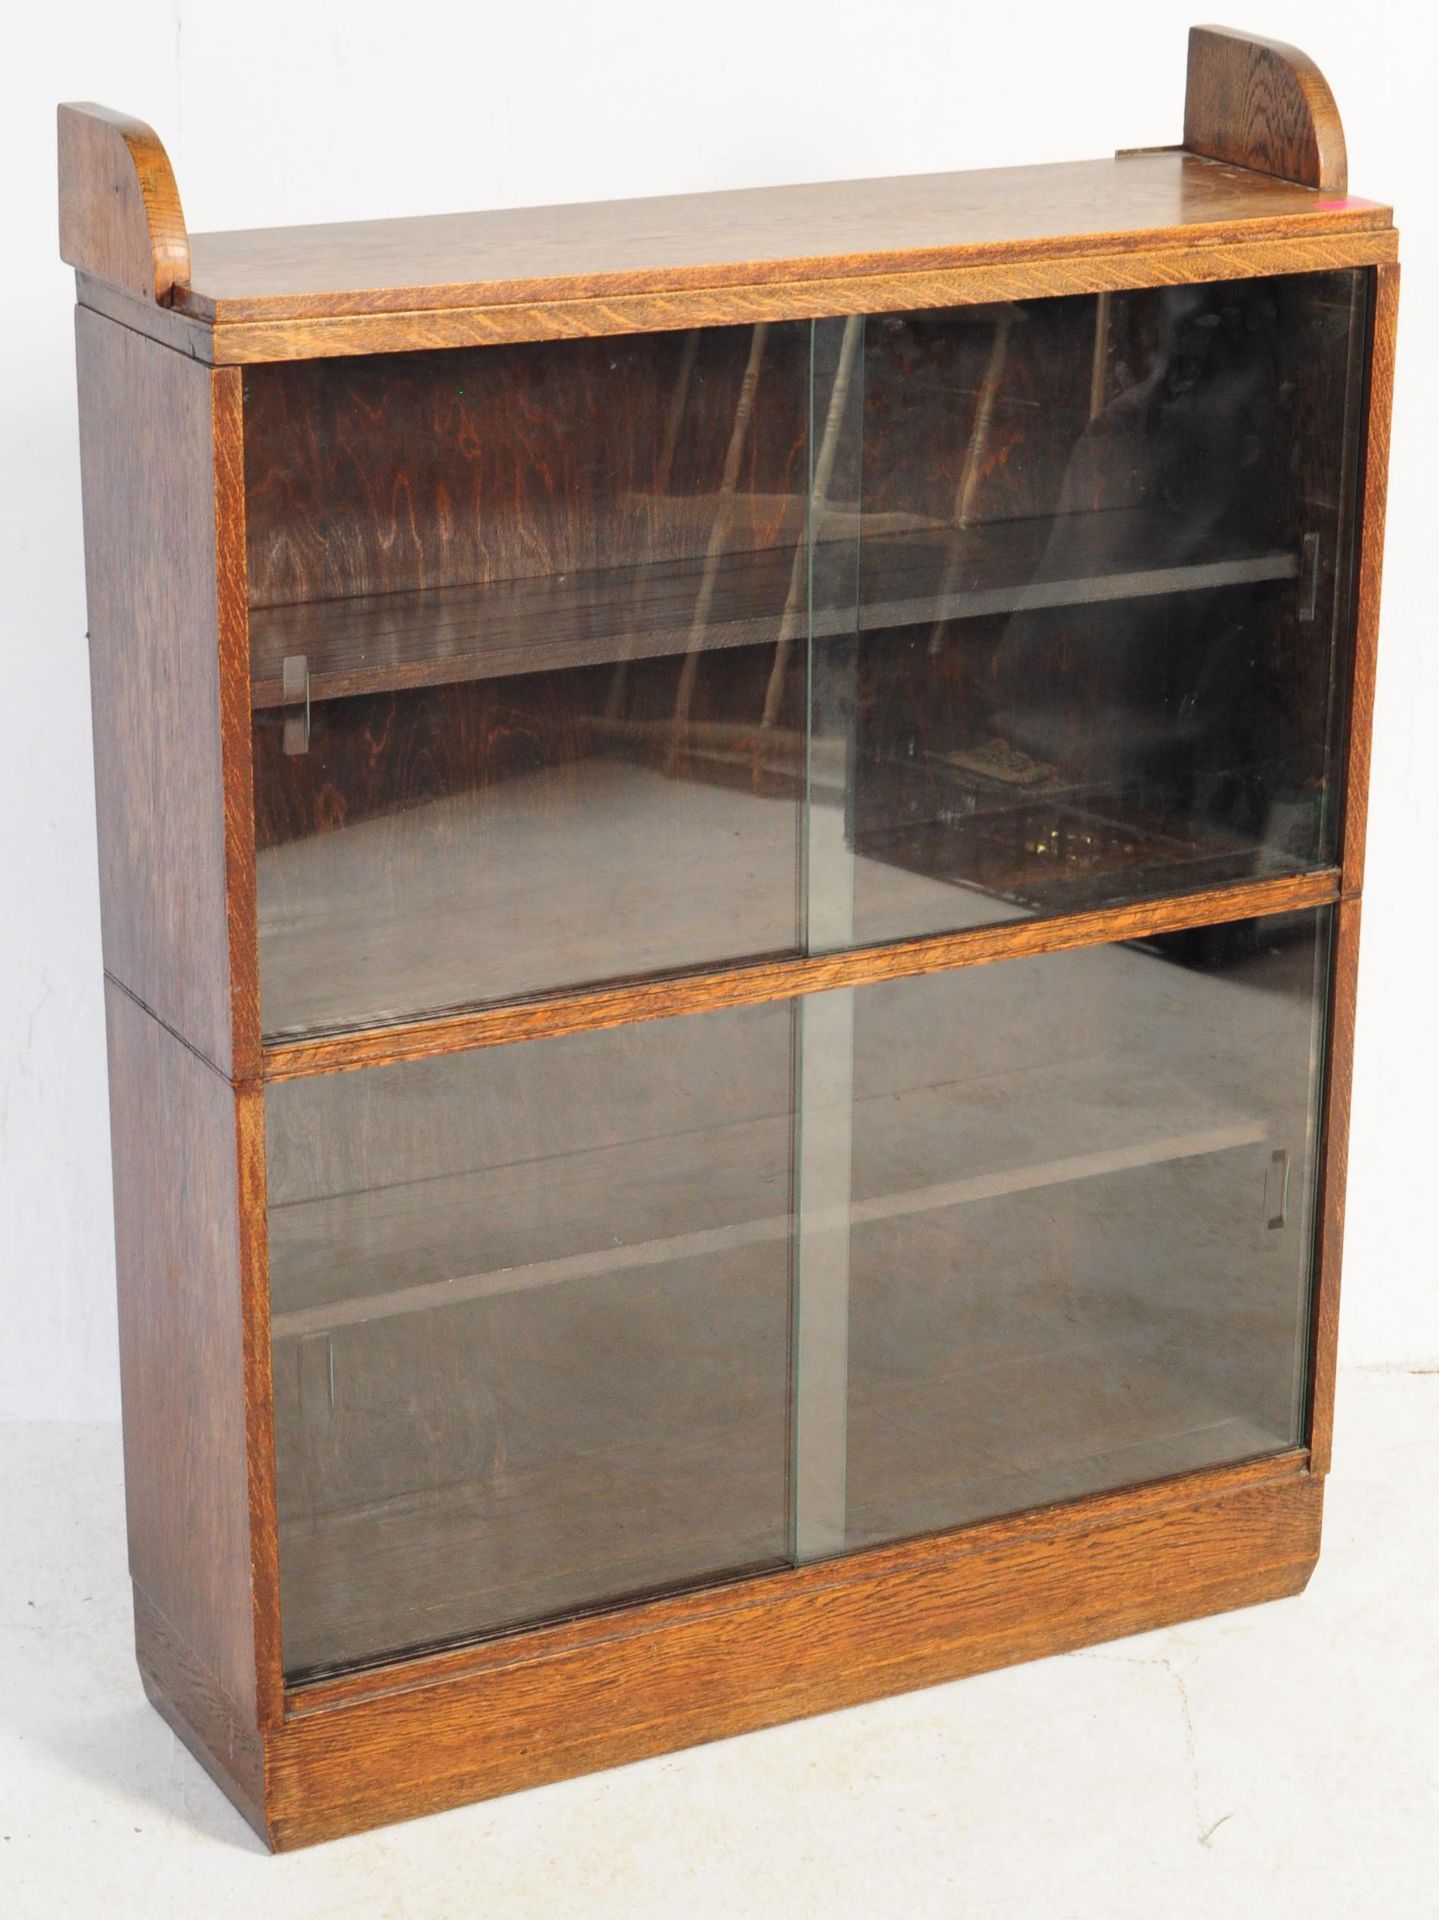 1930S ART DECO LAWYERS OAK SECTIONAL STACKING BOOKCASE - Image 2 of 5